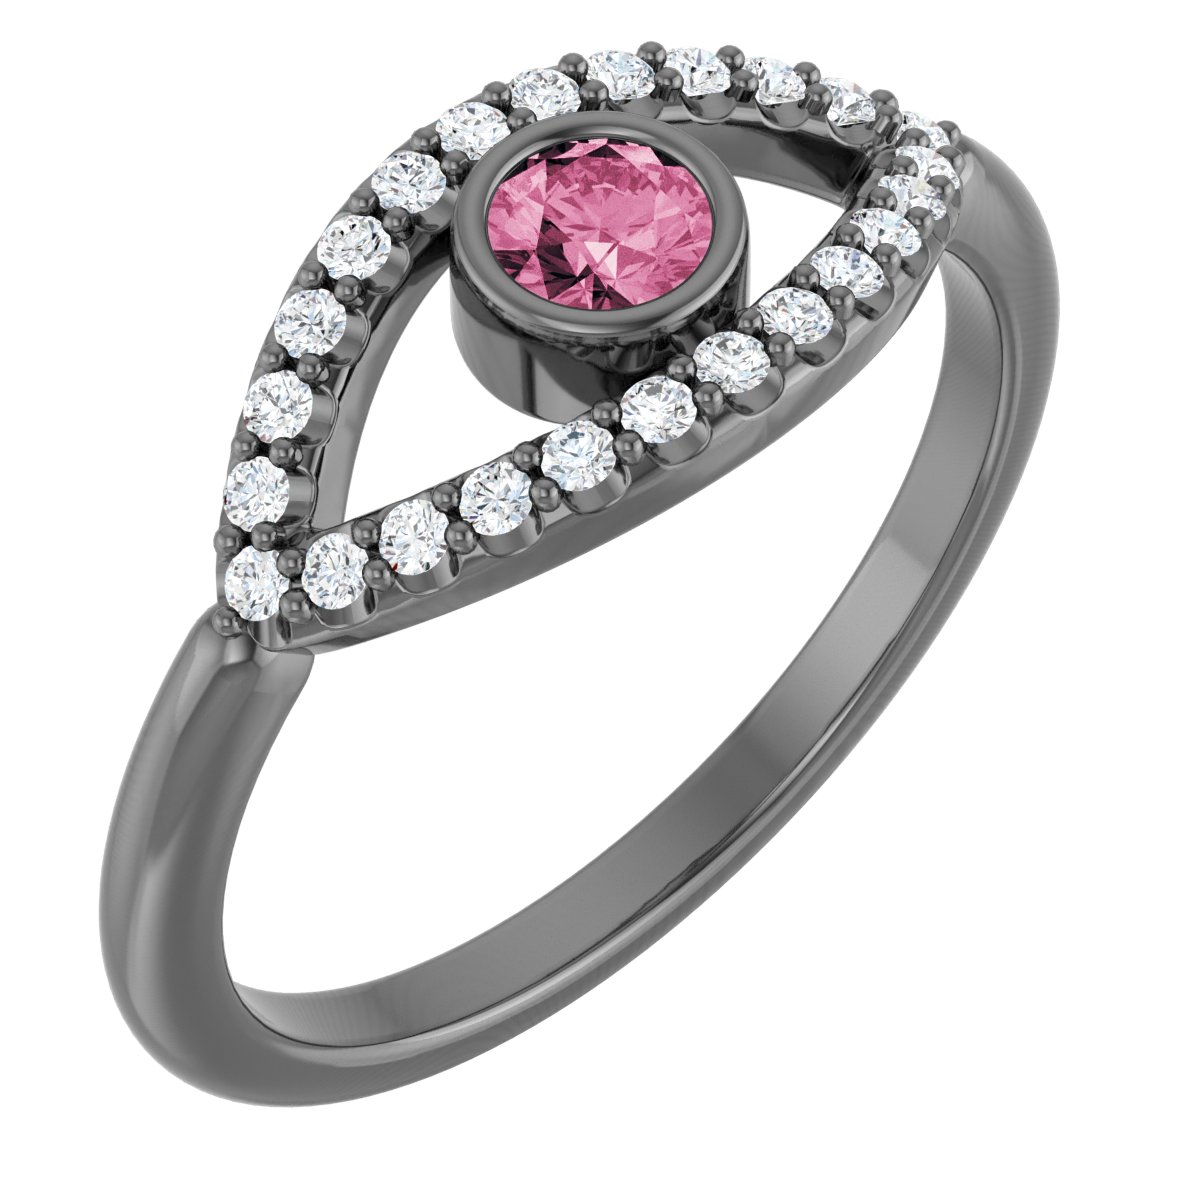 Sterling Silver Pink Tourmaline and White Sapphire Evil Eye Ring Ref 15153713